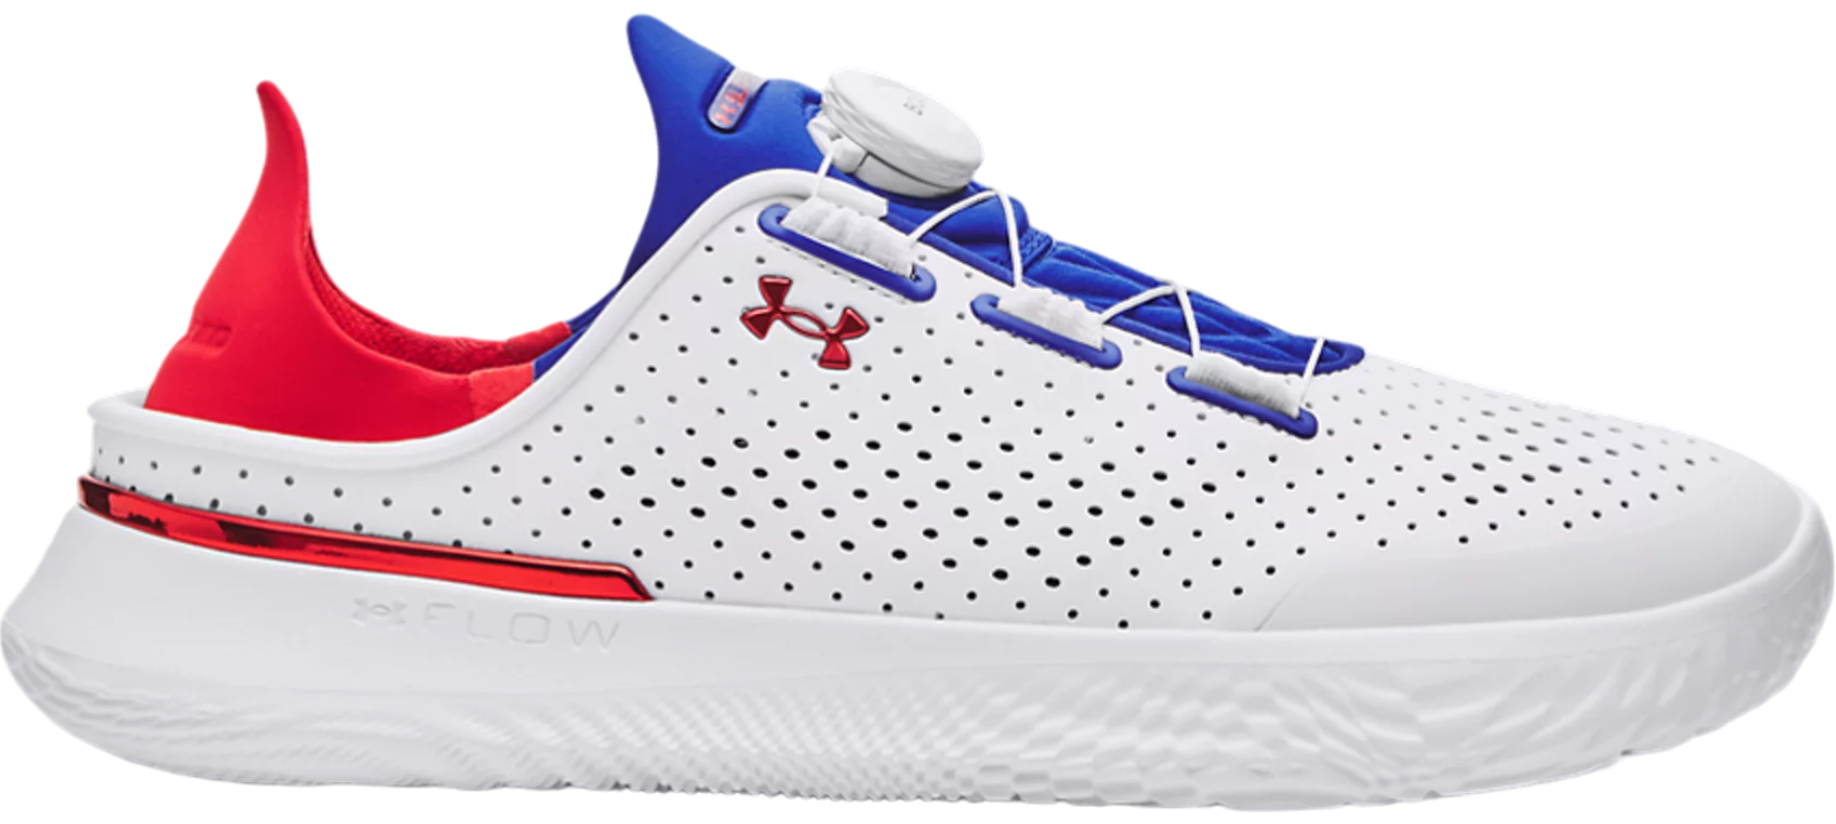 Fitness shoes Under Armour Flow Slipspeed Trainr SYN